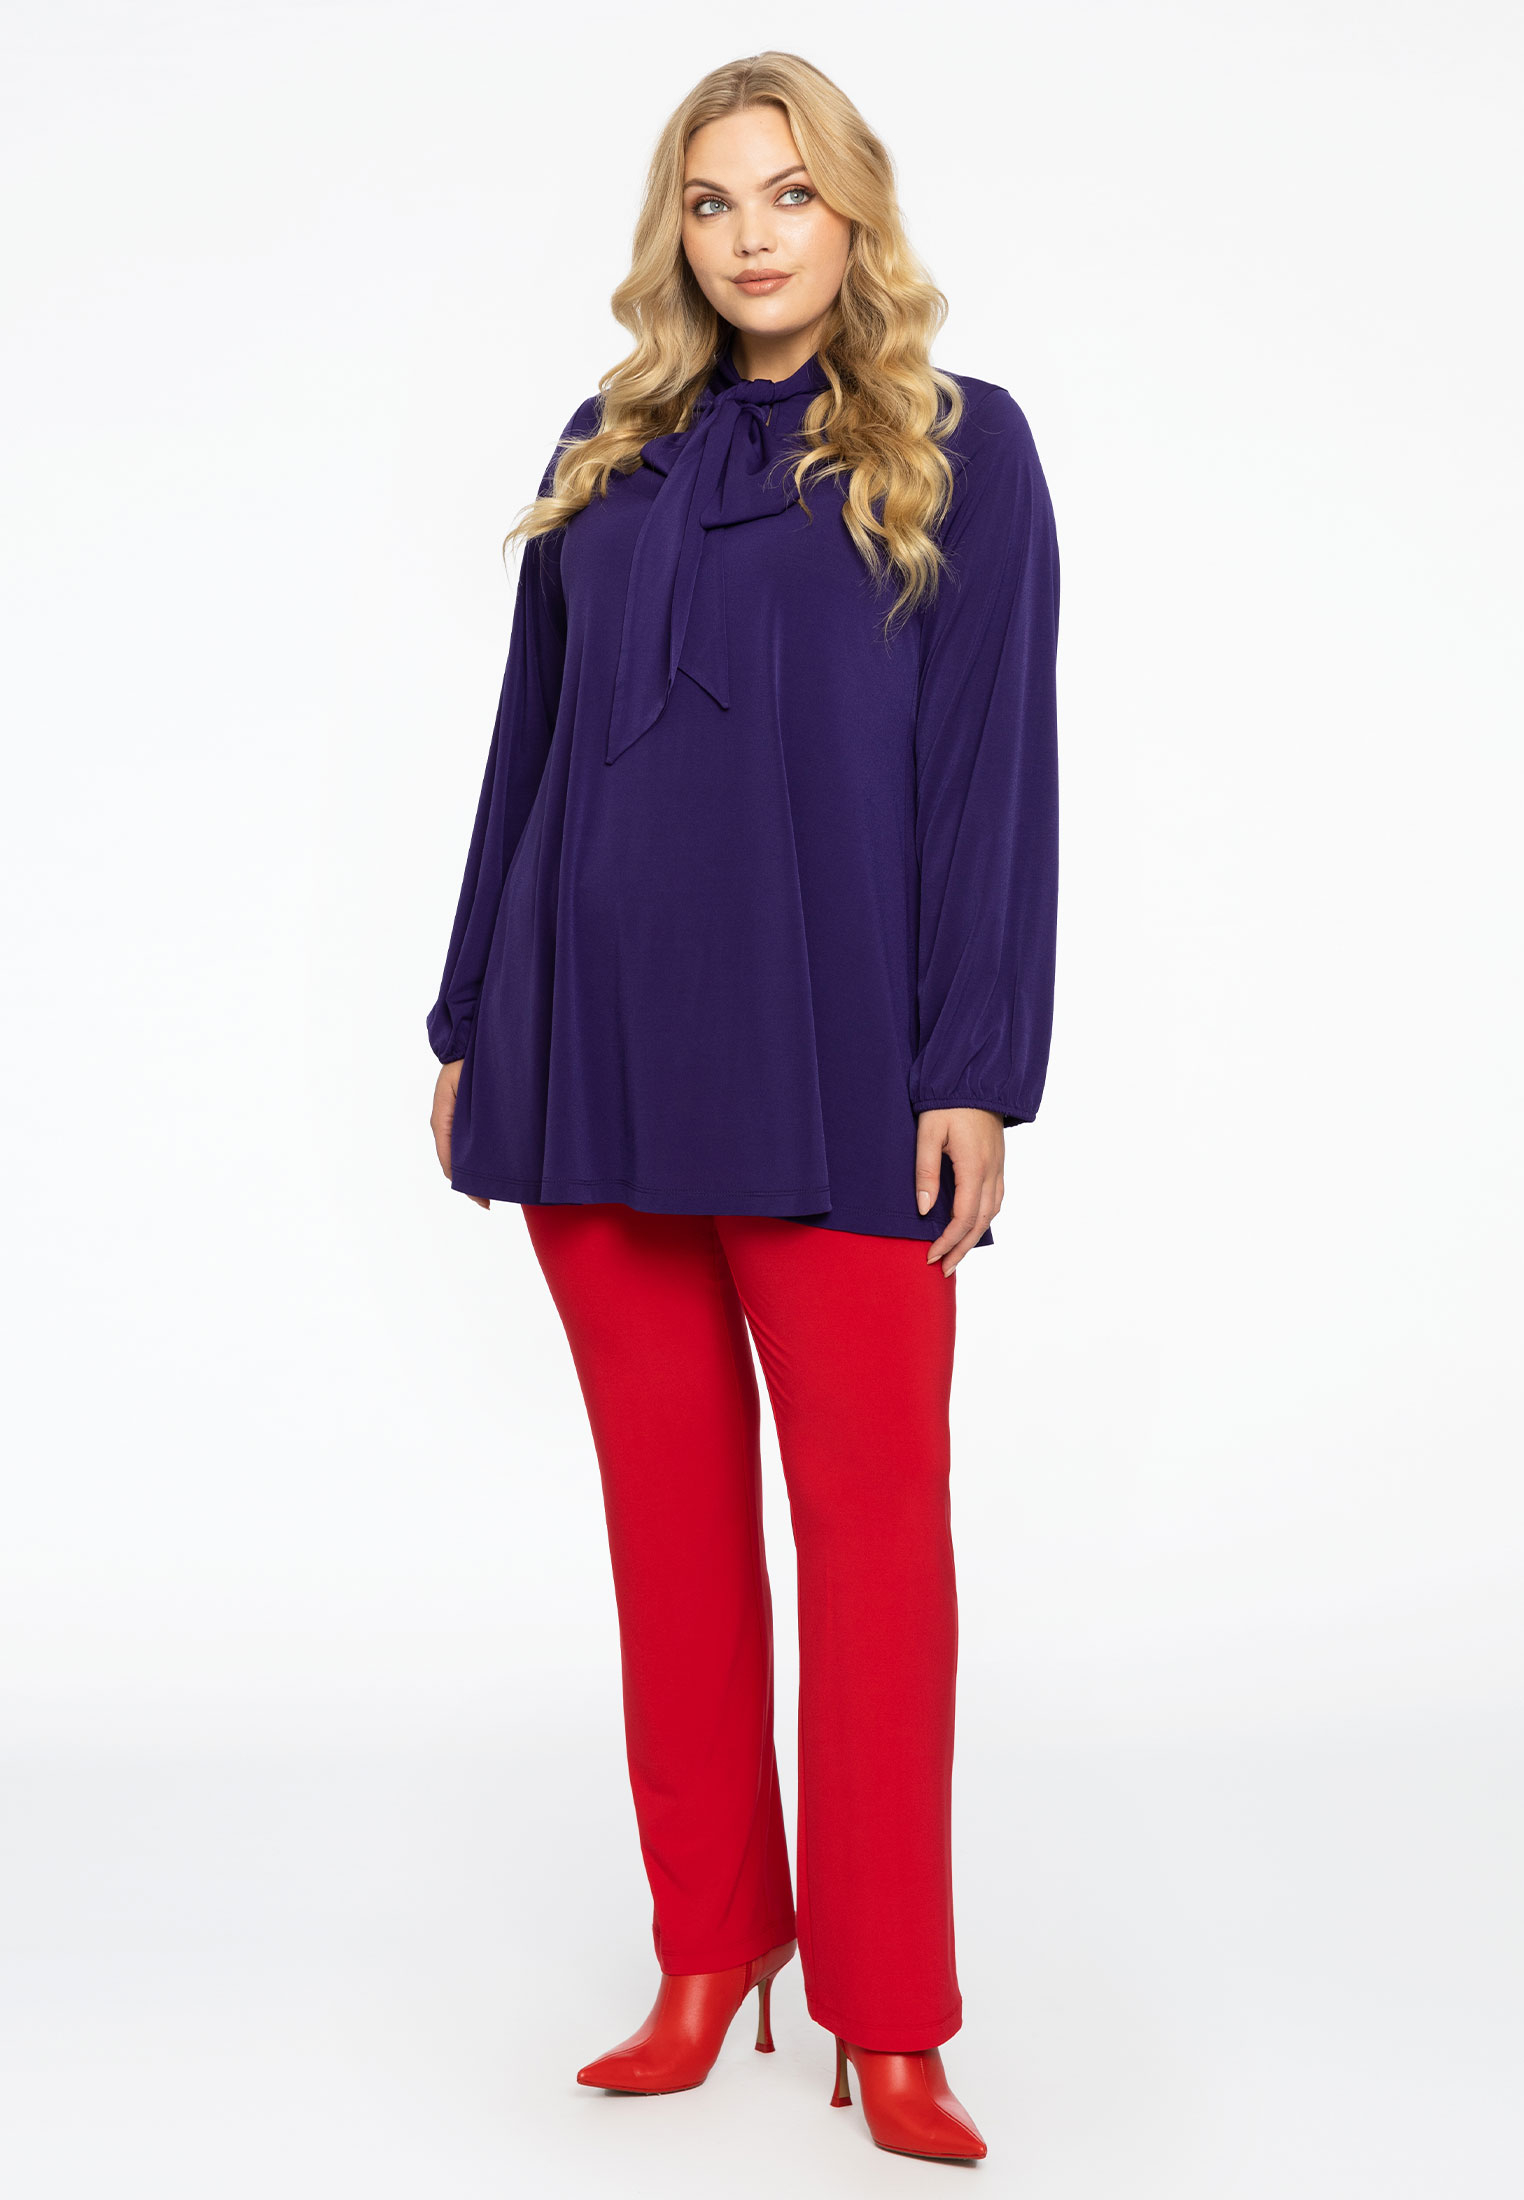 Tunic wide bottom bow DOLCE - black red purple 